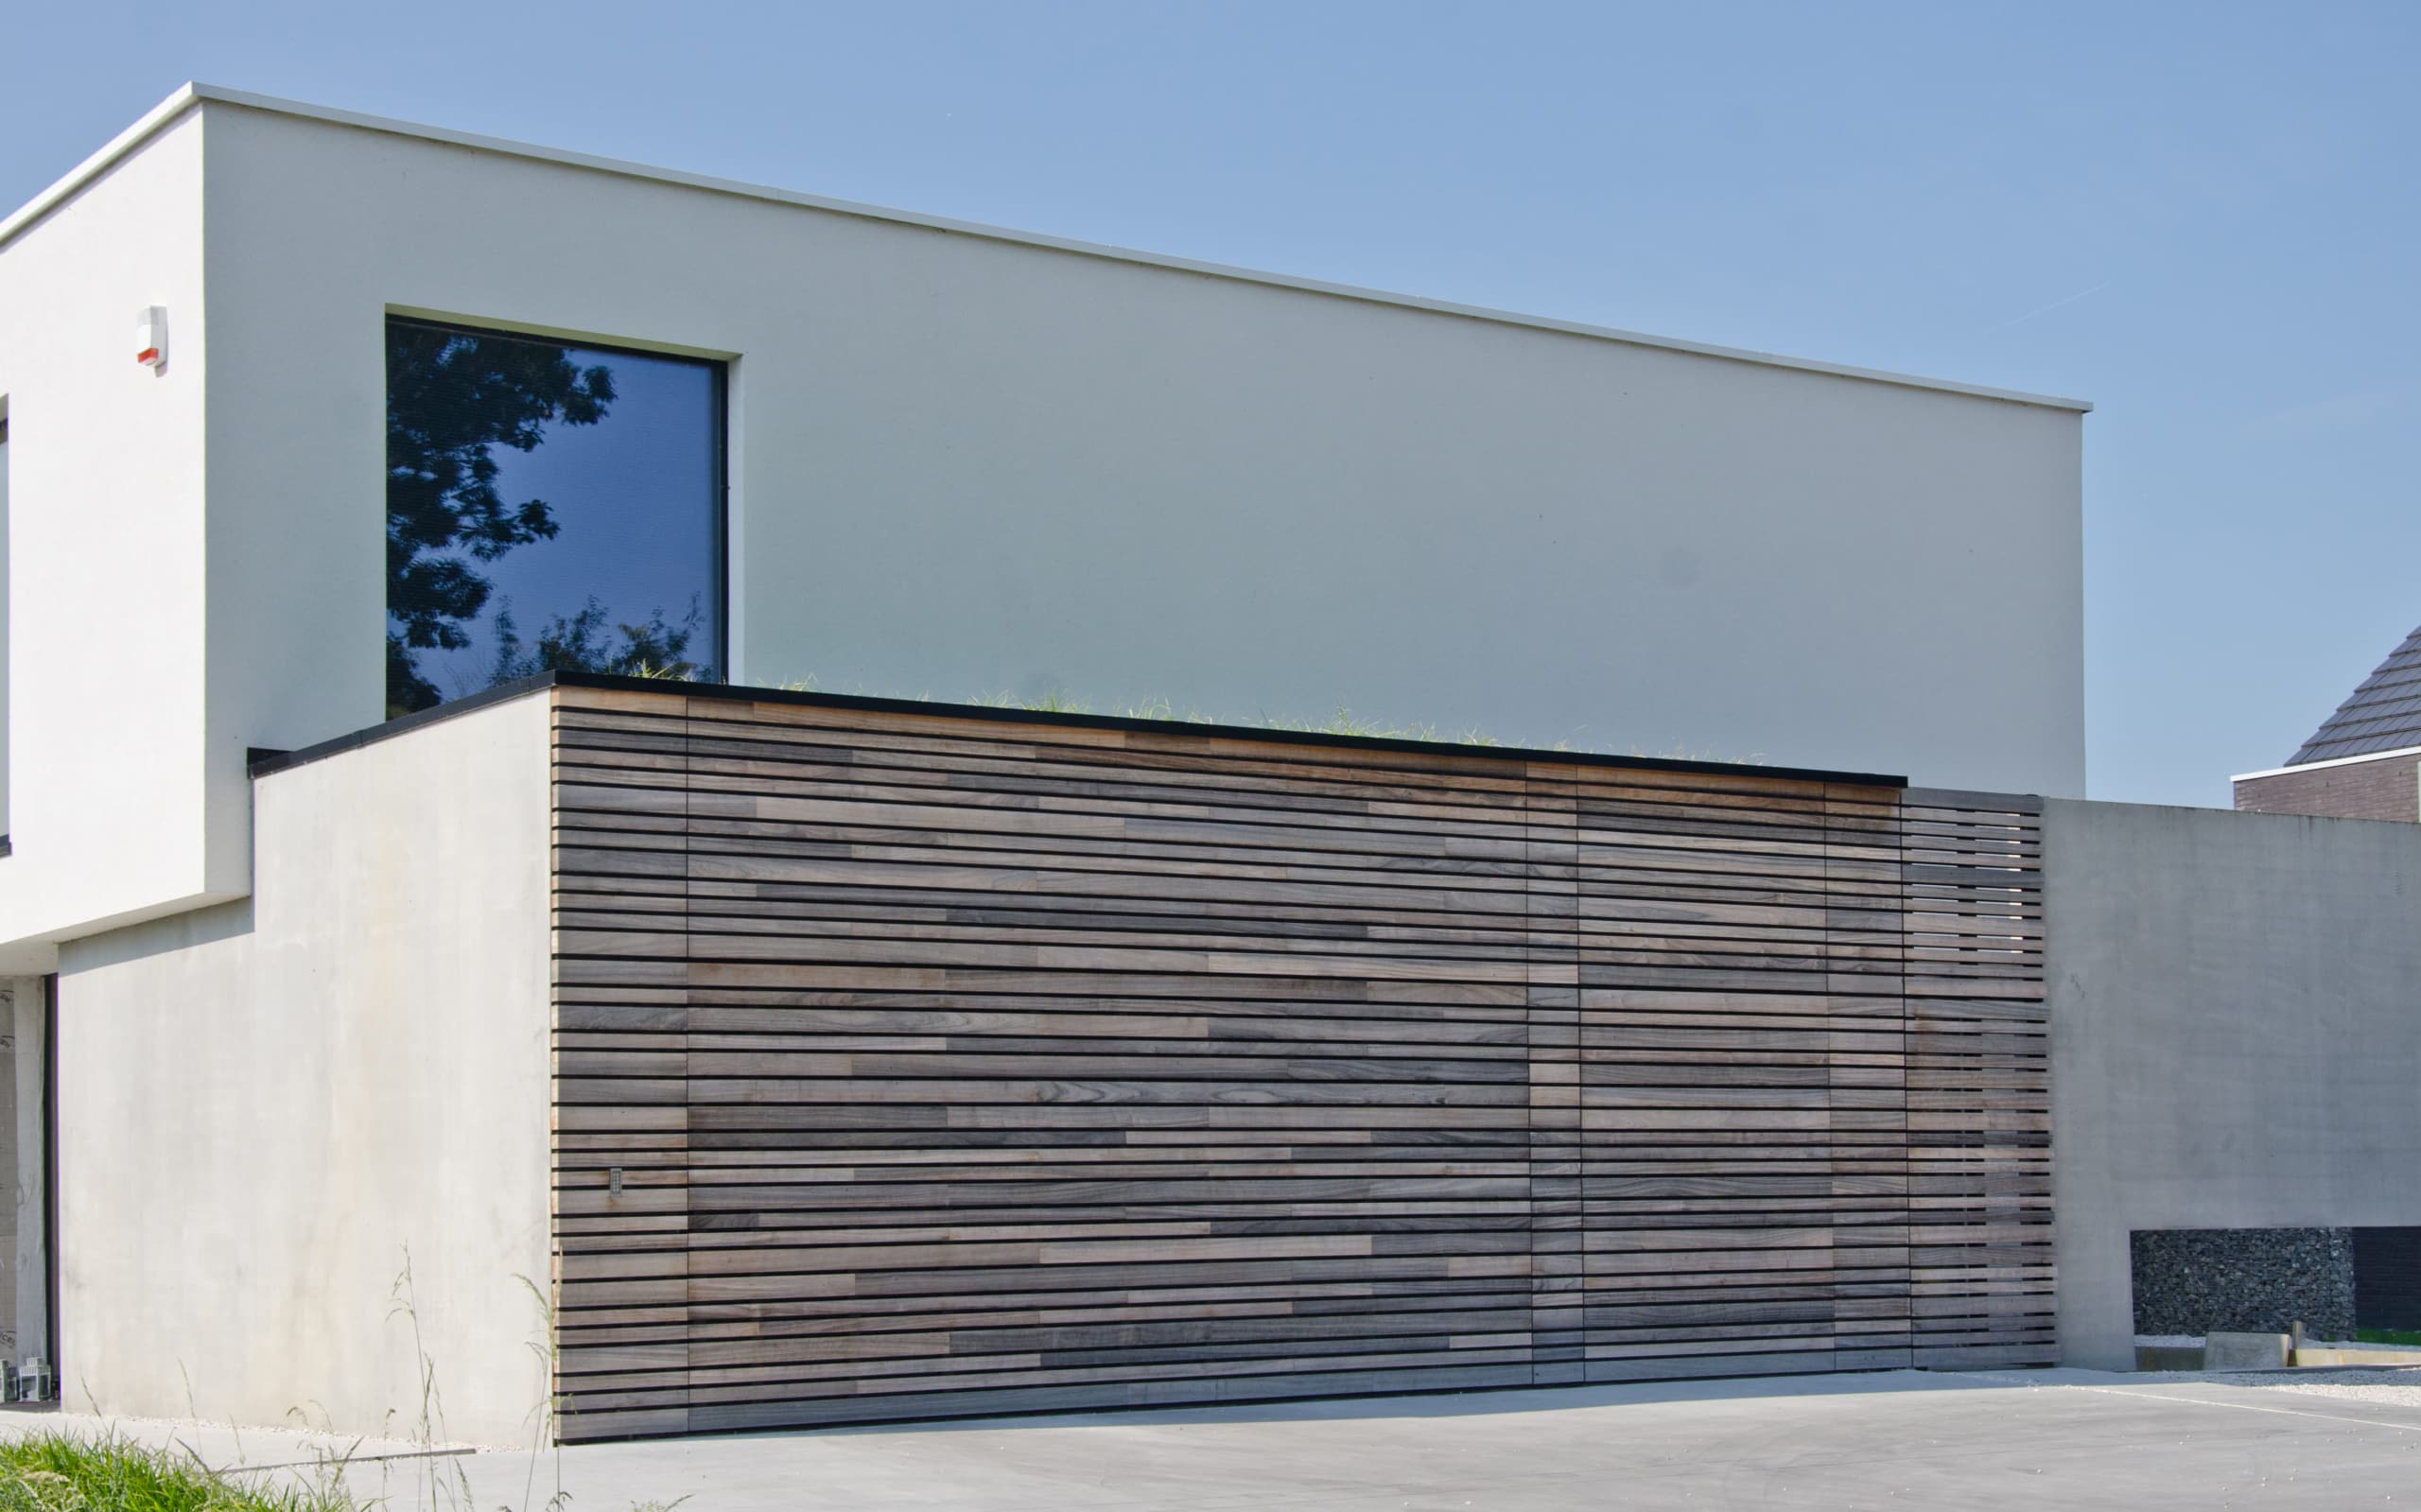 Bardage en bois padouk electrical garage with techniclic wood cladding invisible system in Belgium by Vetedy